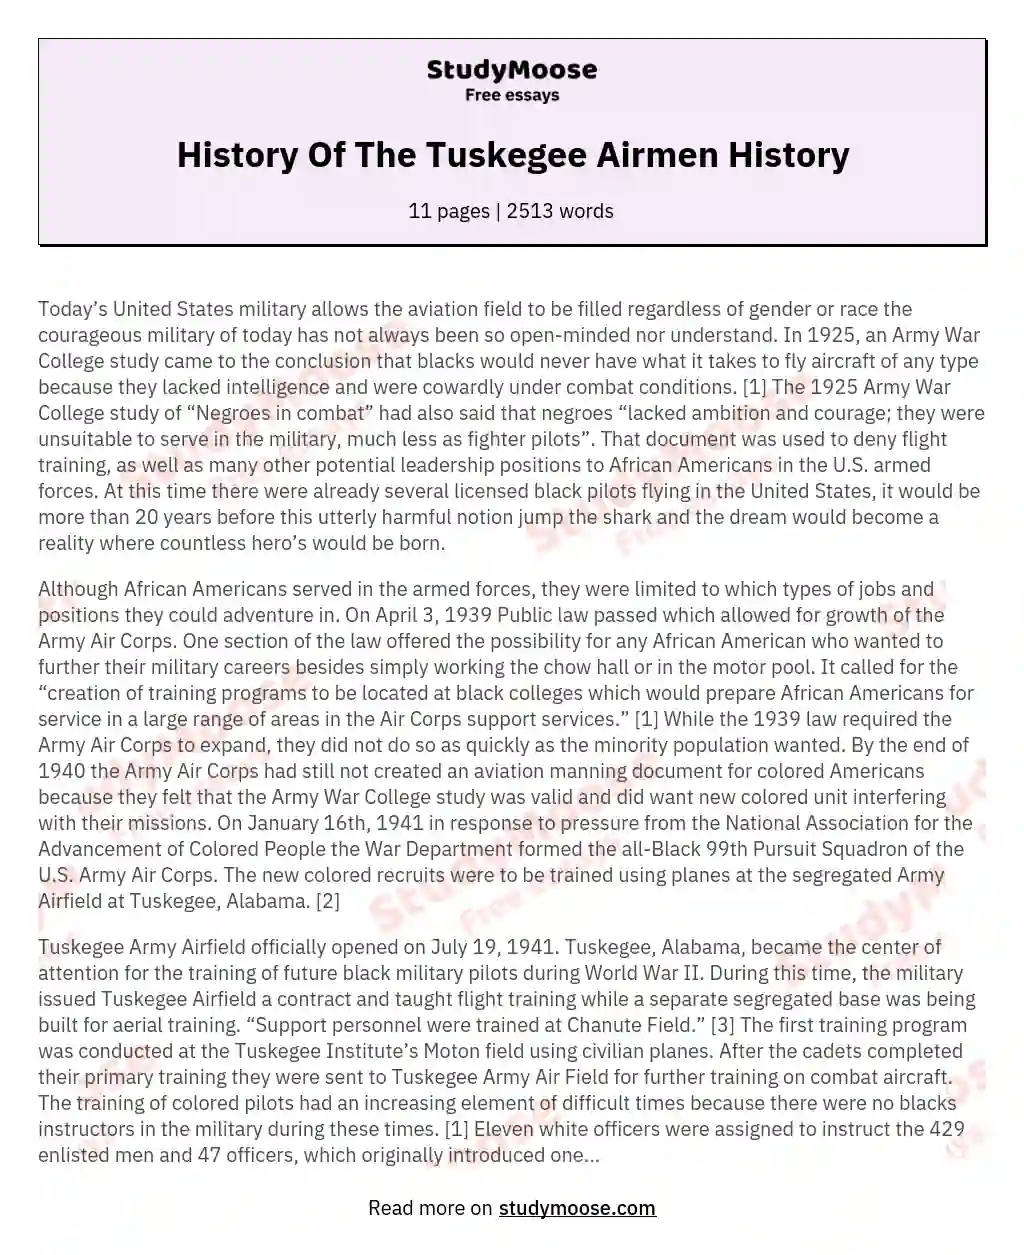 History Of The Tuskegee Airmen History